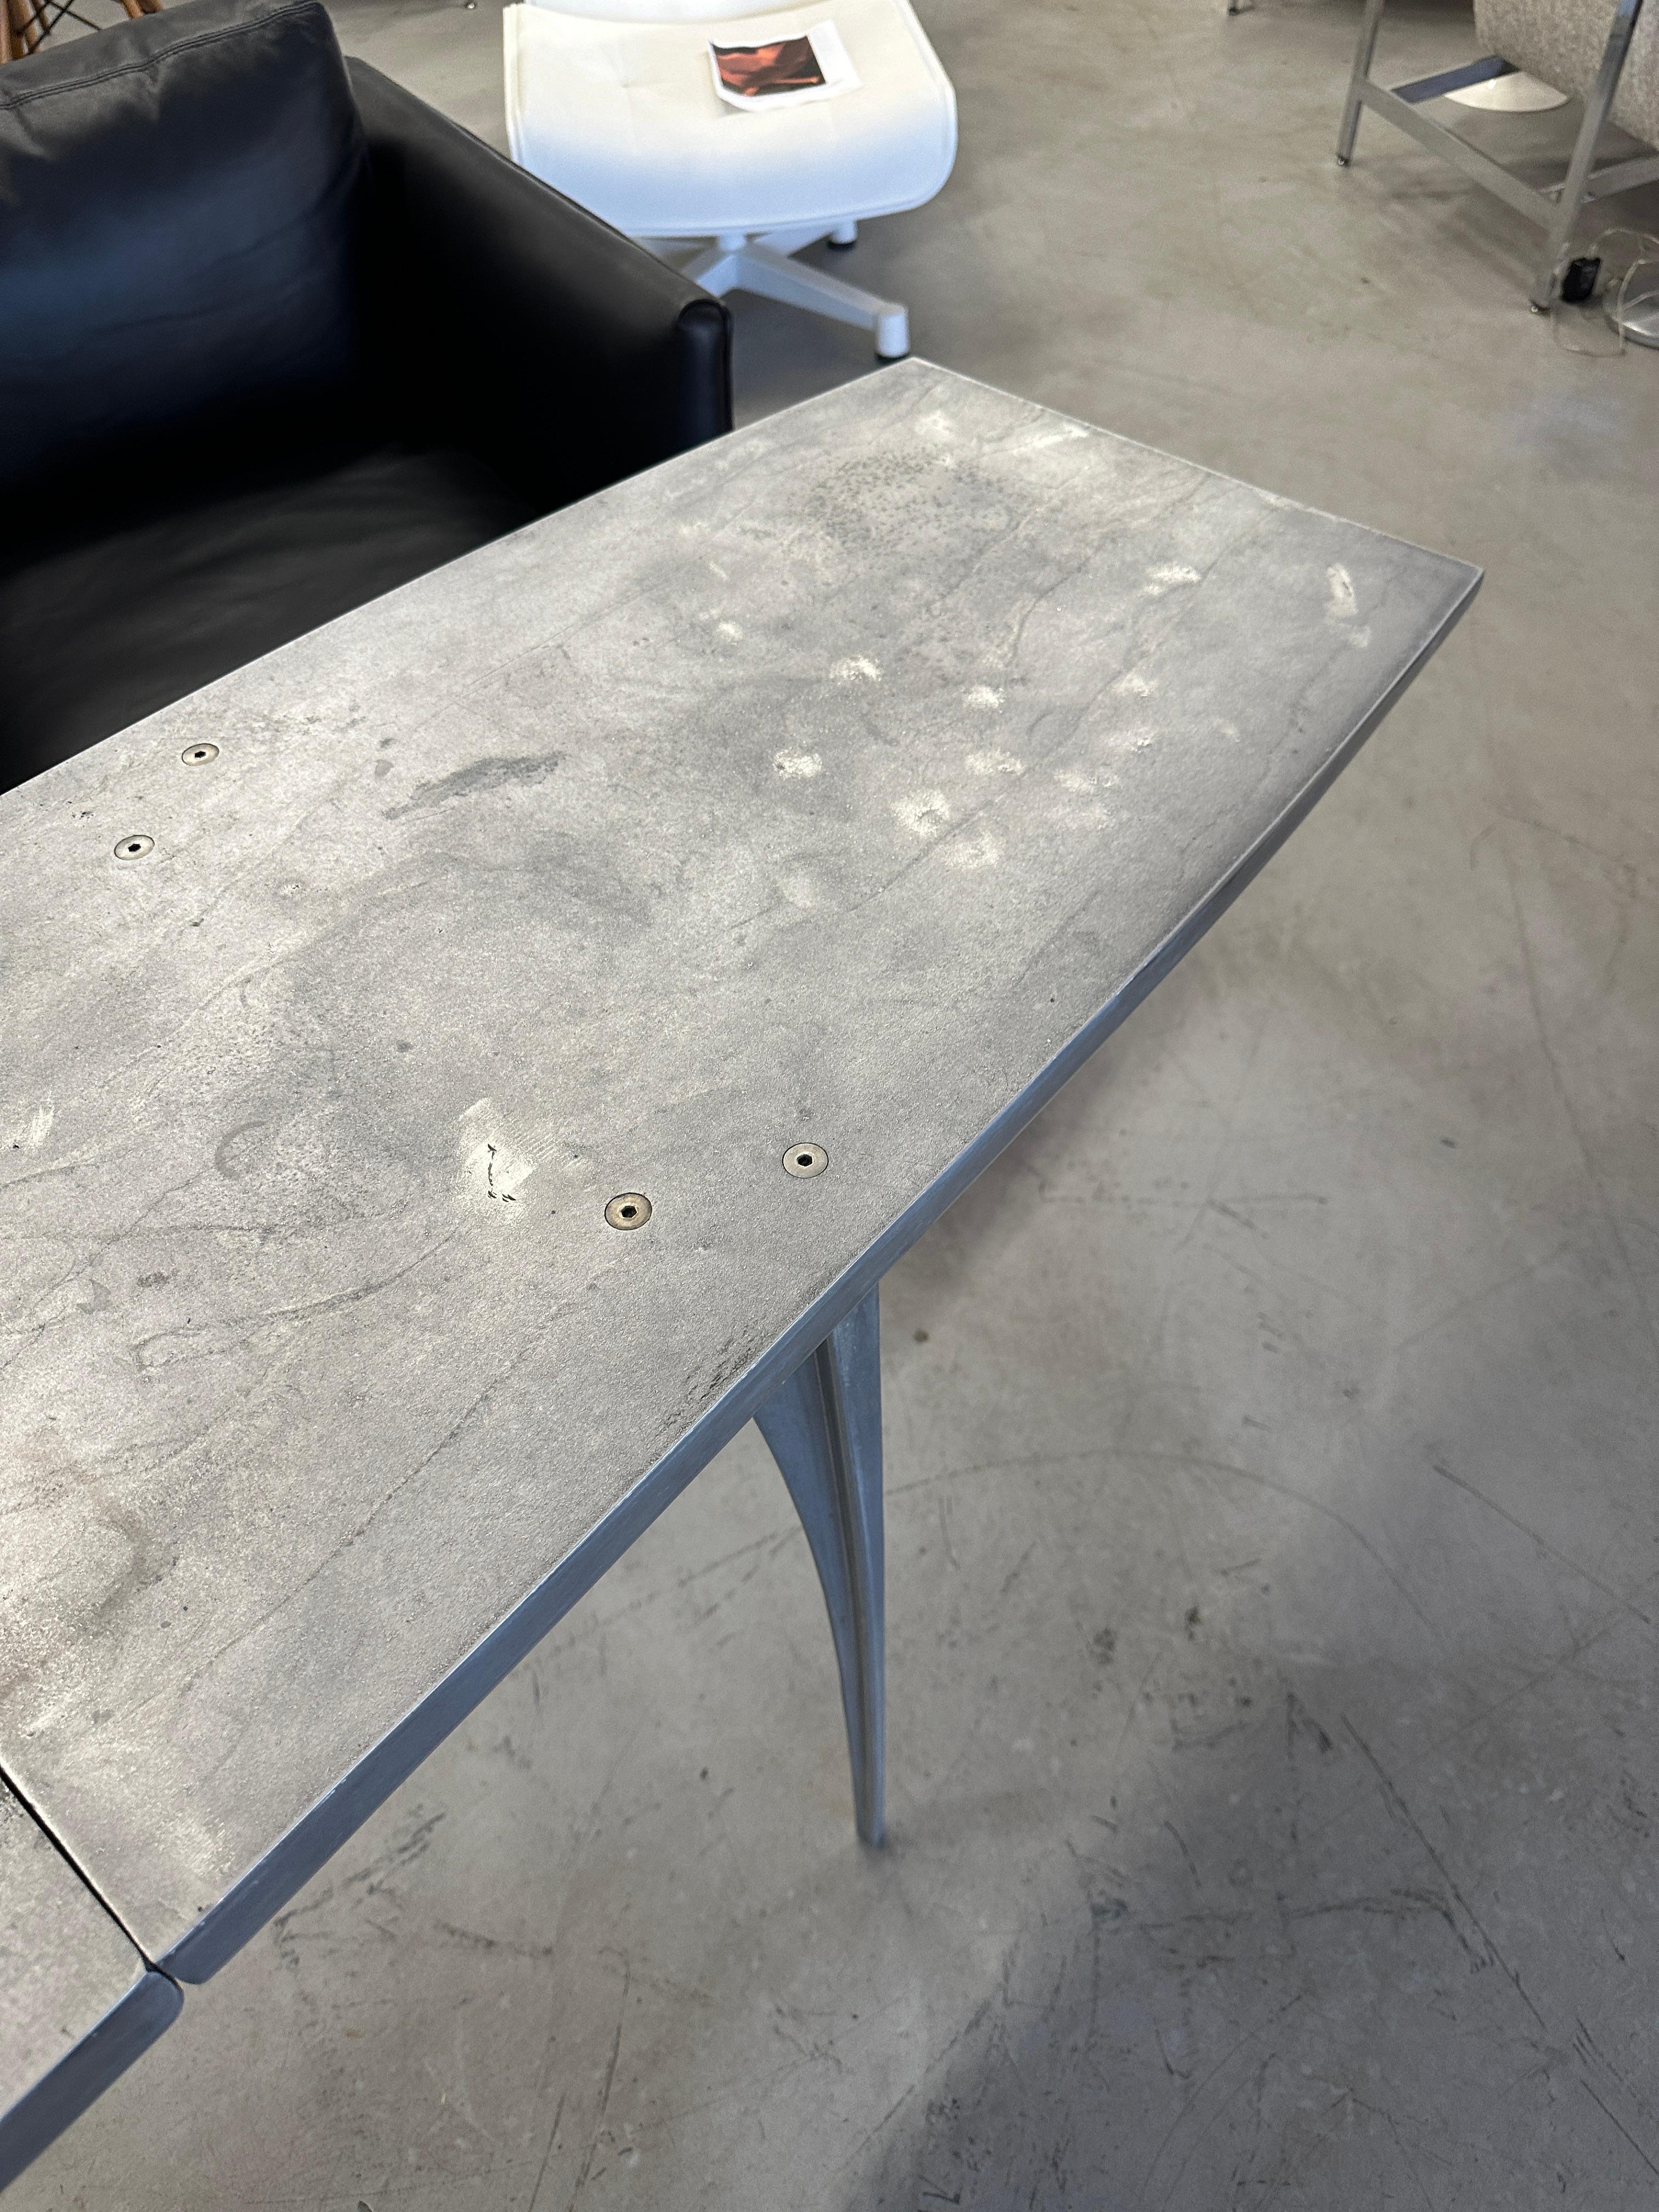 Wonderful Sculptural aluminum console or sofa table by the noted Californian Robert Josten. We found this table in an outdoor setting in a lovely Palm Springs estate. As it is solid aluminum it will not rust and can be polished to a high luster if